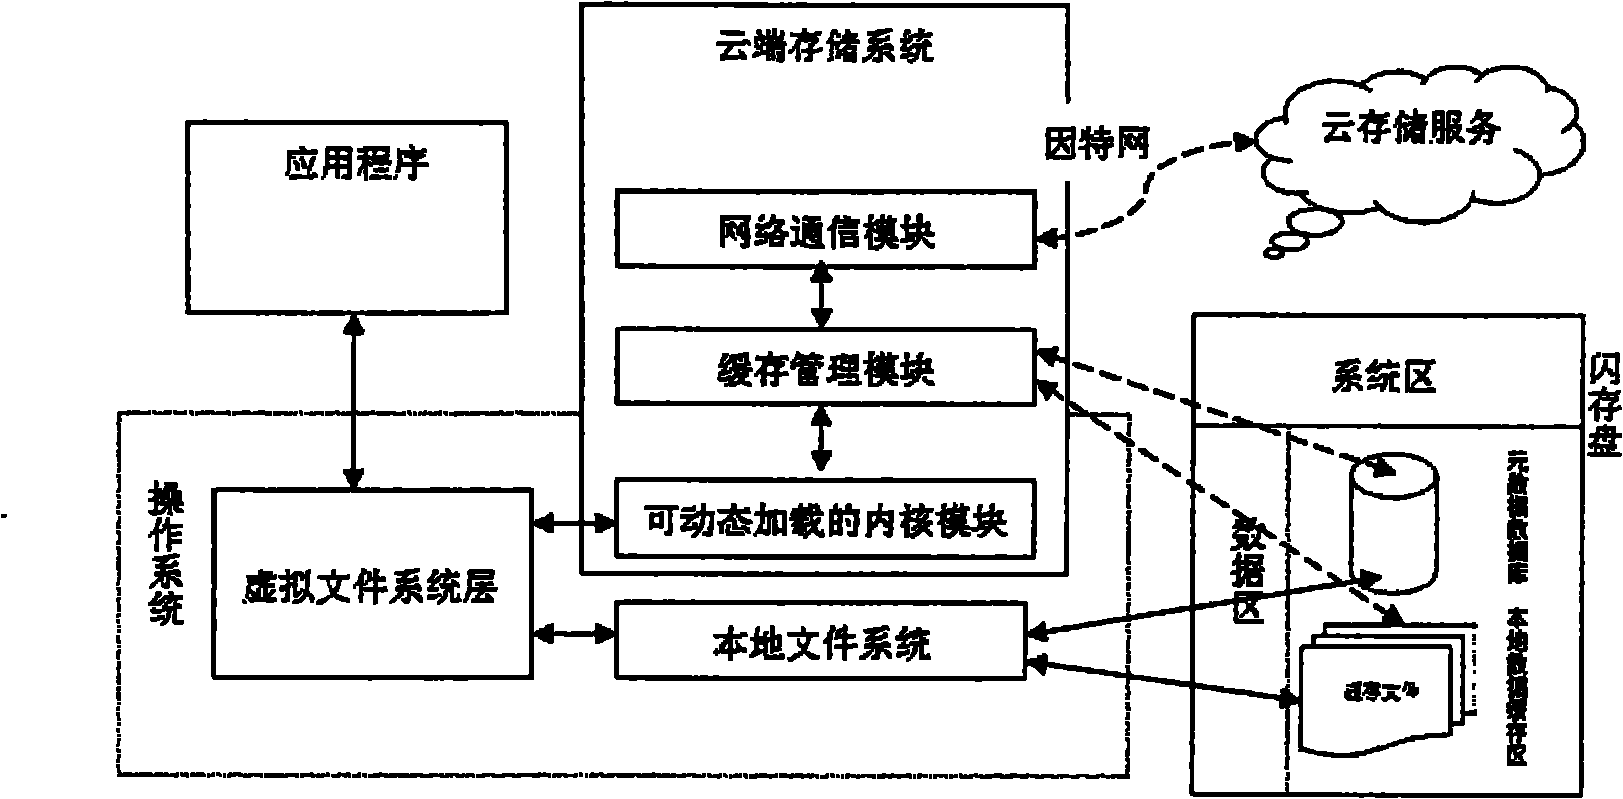 Data caching method of cloud storage system